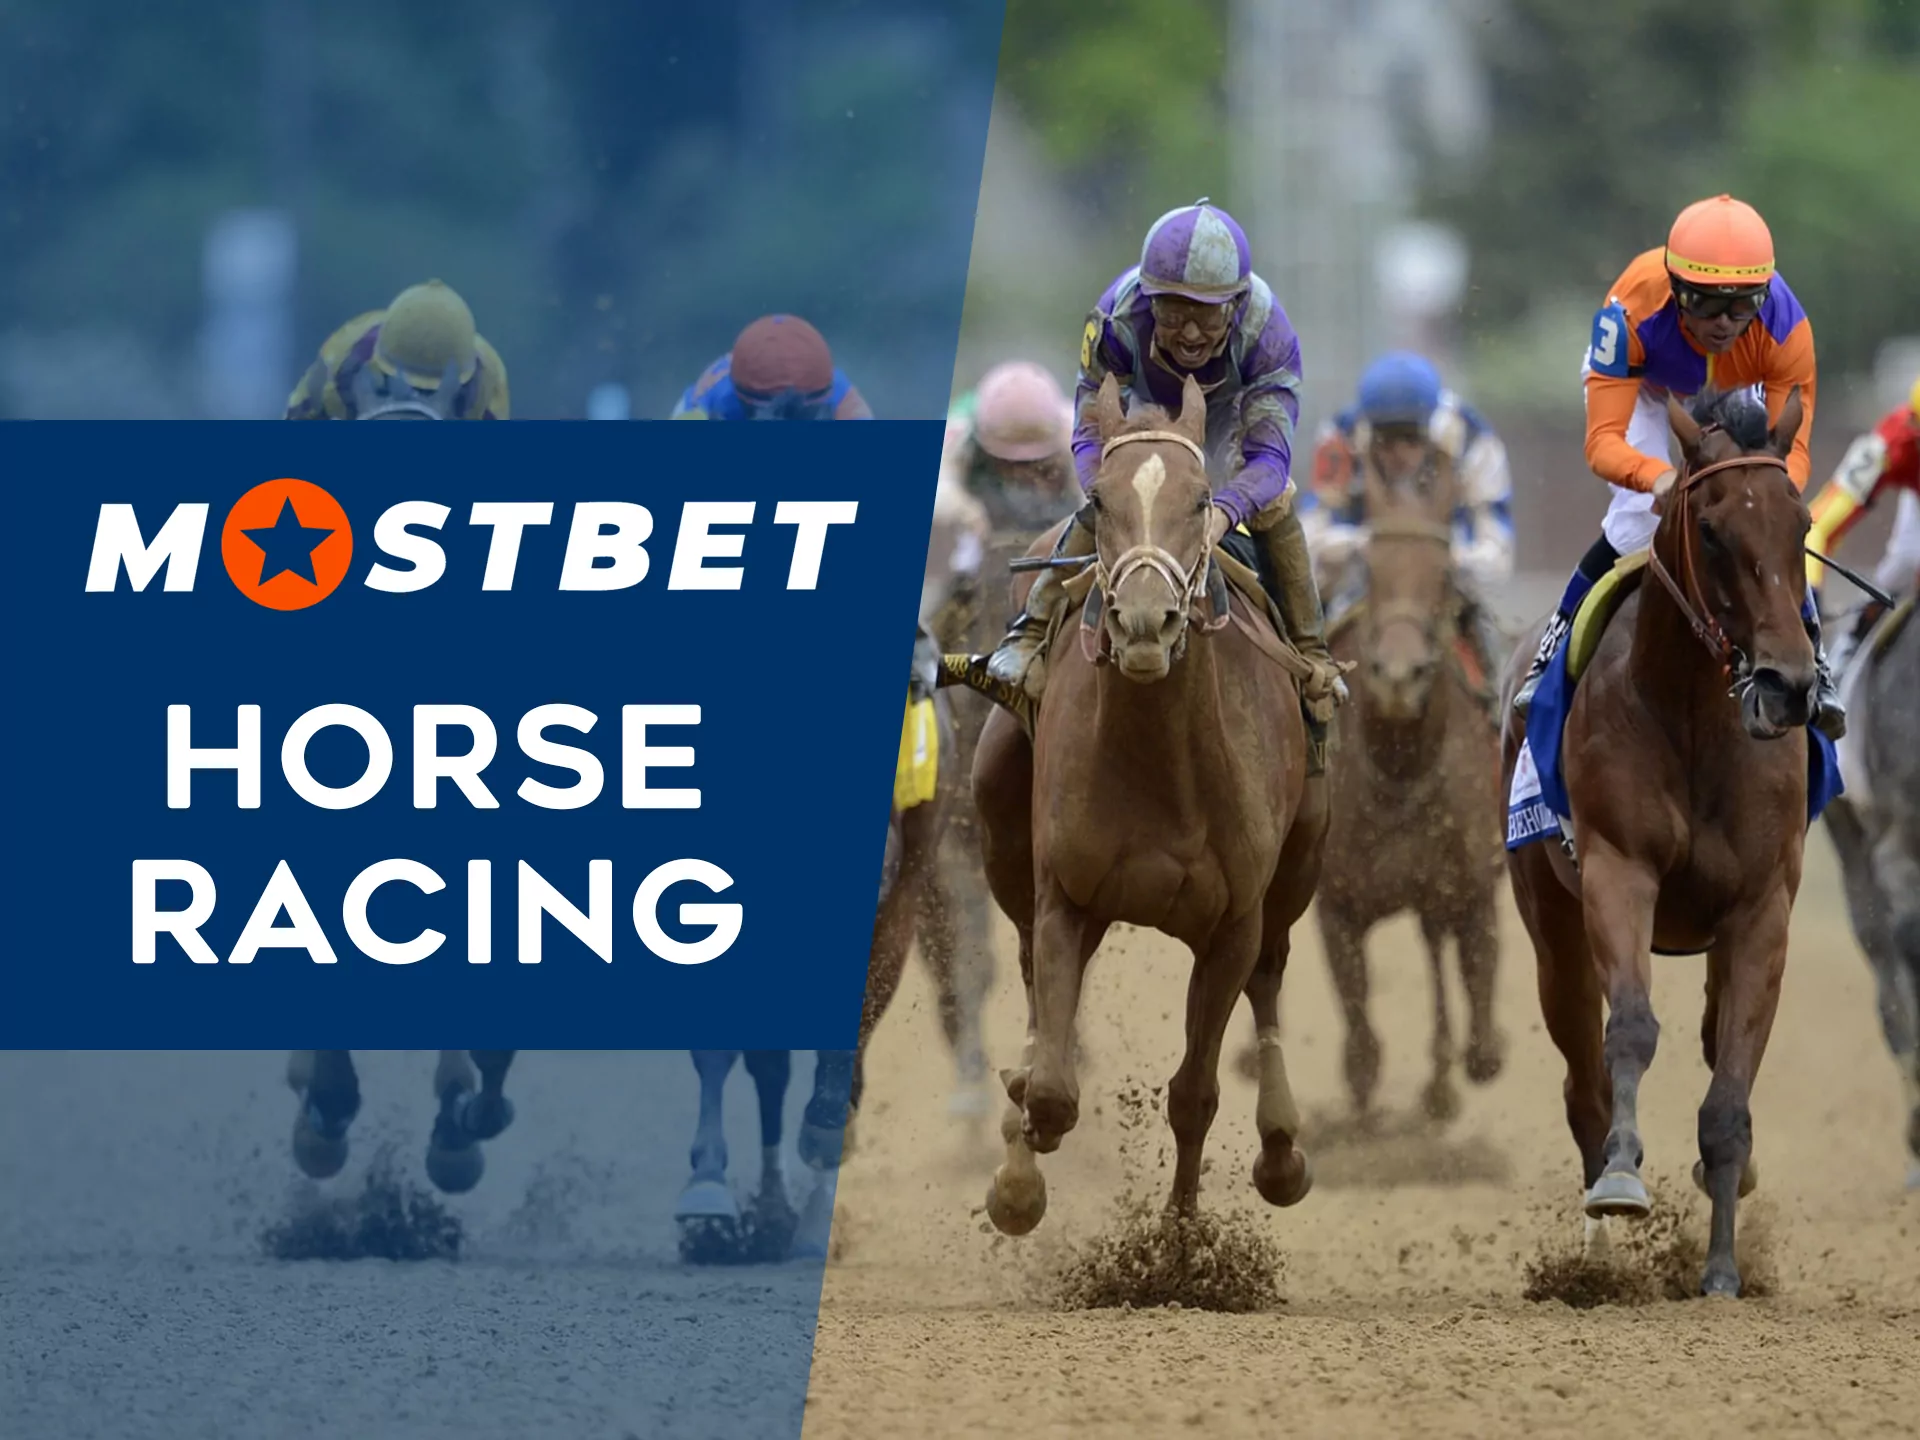 Horse racing betting at Mostbet.